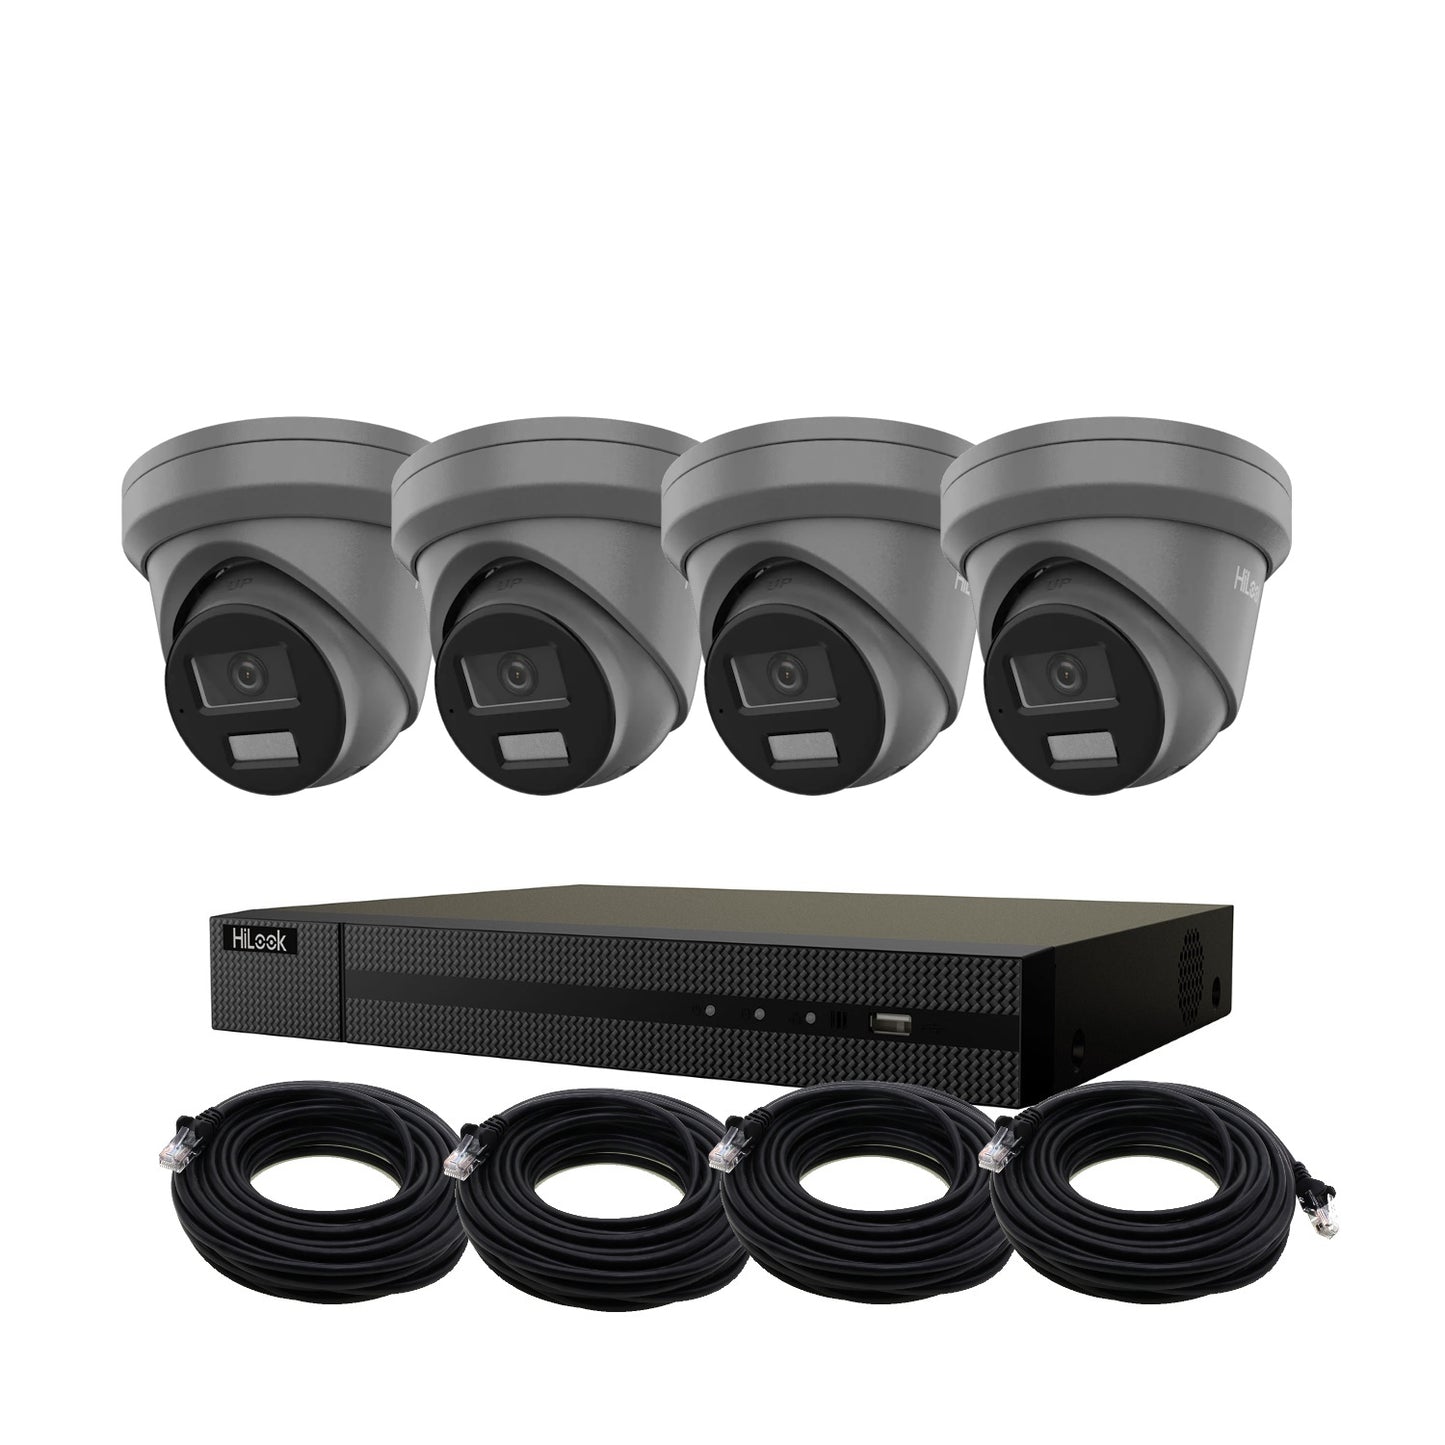 5MP HiLook ColorVu IP POE CCTV Kit With 4 Cameras, Built-in Mic, 2TB HDD & Ready Made Cables